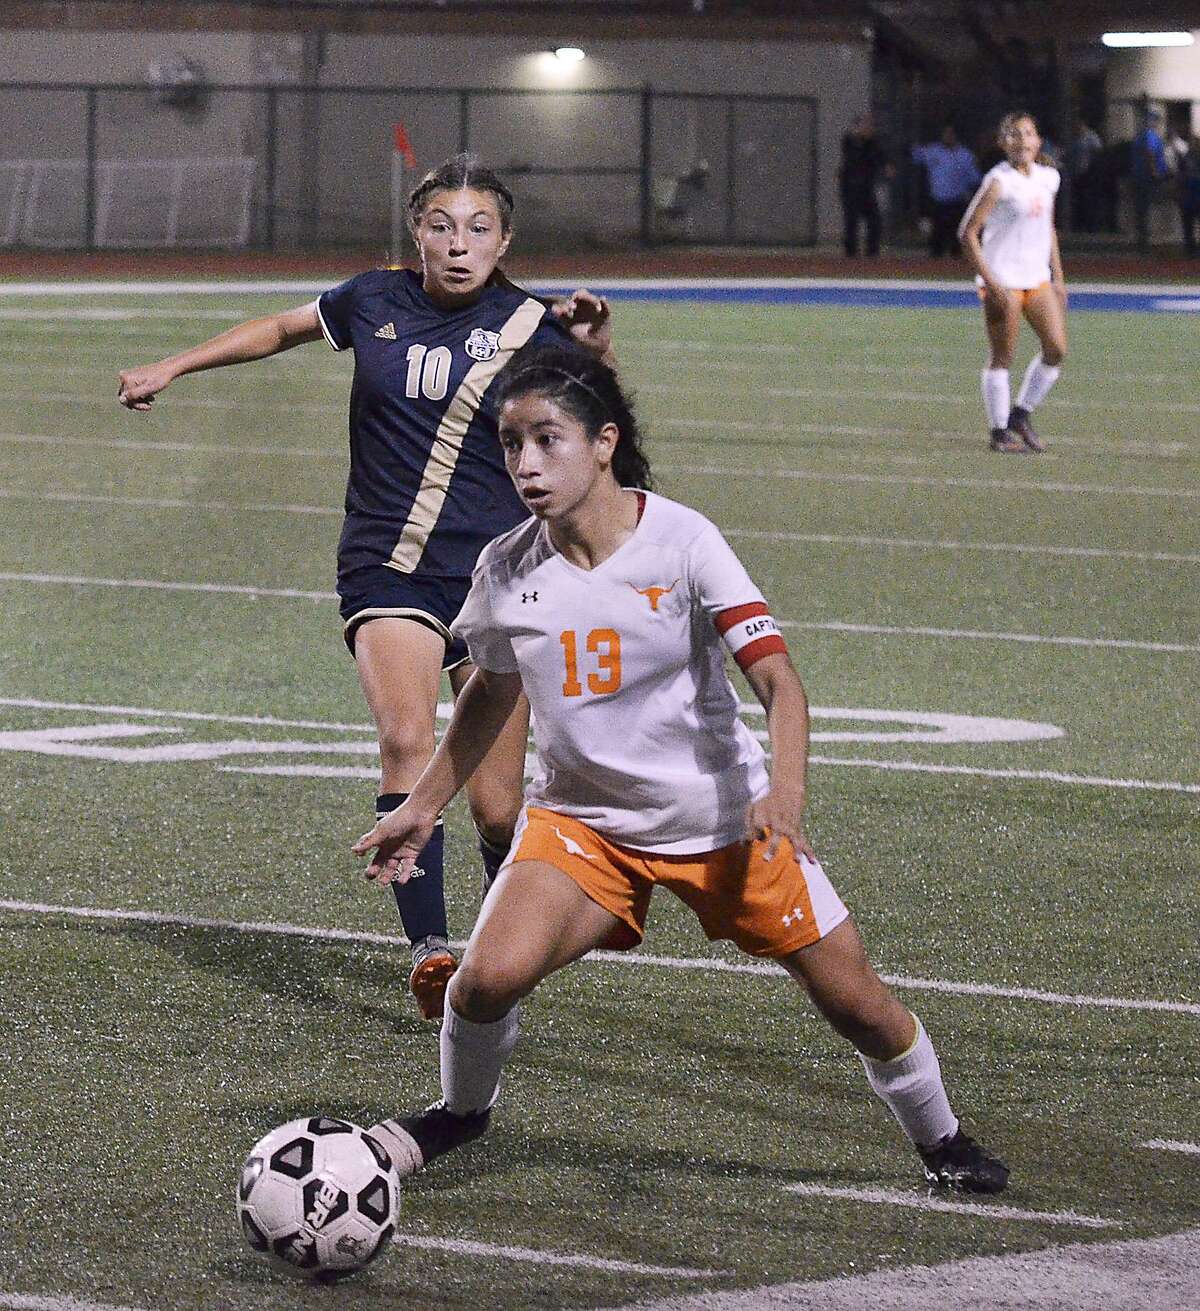 With their 3-0 victory over Del Rio last Friday, the United Lady Longhorns clinched the District 29-6A title.